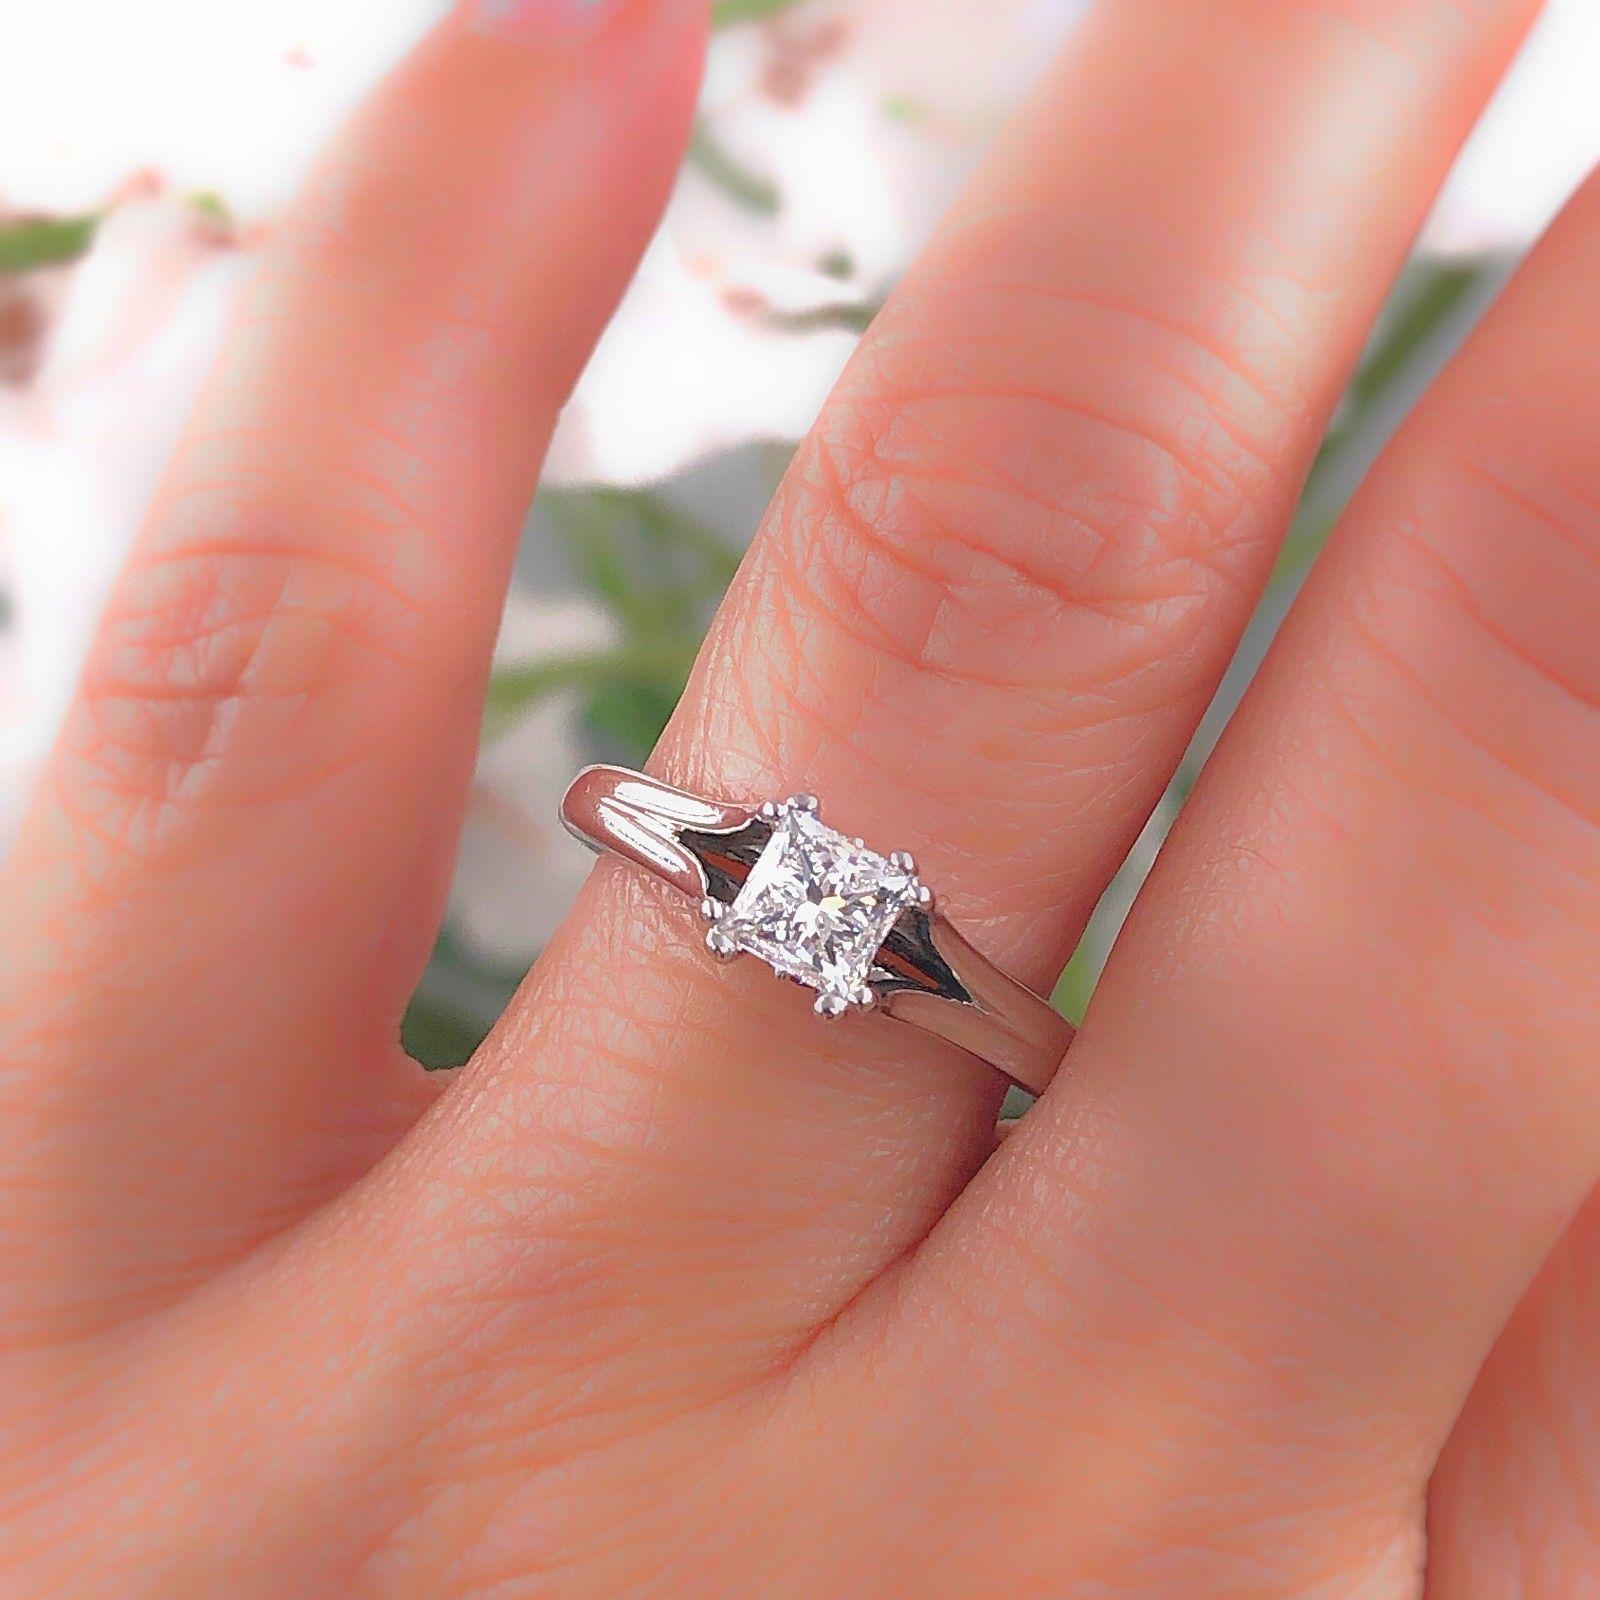 VERA WANG Diamond Engagement Ring
Style:  Split Shank Solitaire
Metal:  18kt White Gold
Size:  6.25 - sizable
Total Carat Weight:  0.85 tcw
Diamond Shape:  Princess Cut 0.60 cts H - I color, SI2 - I1 clarity
Accent Diamond:  12 Round Cuts & 2 Square